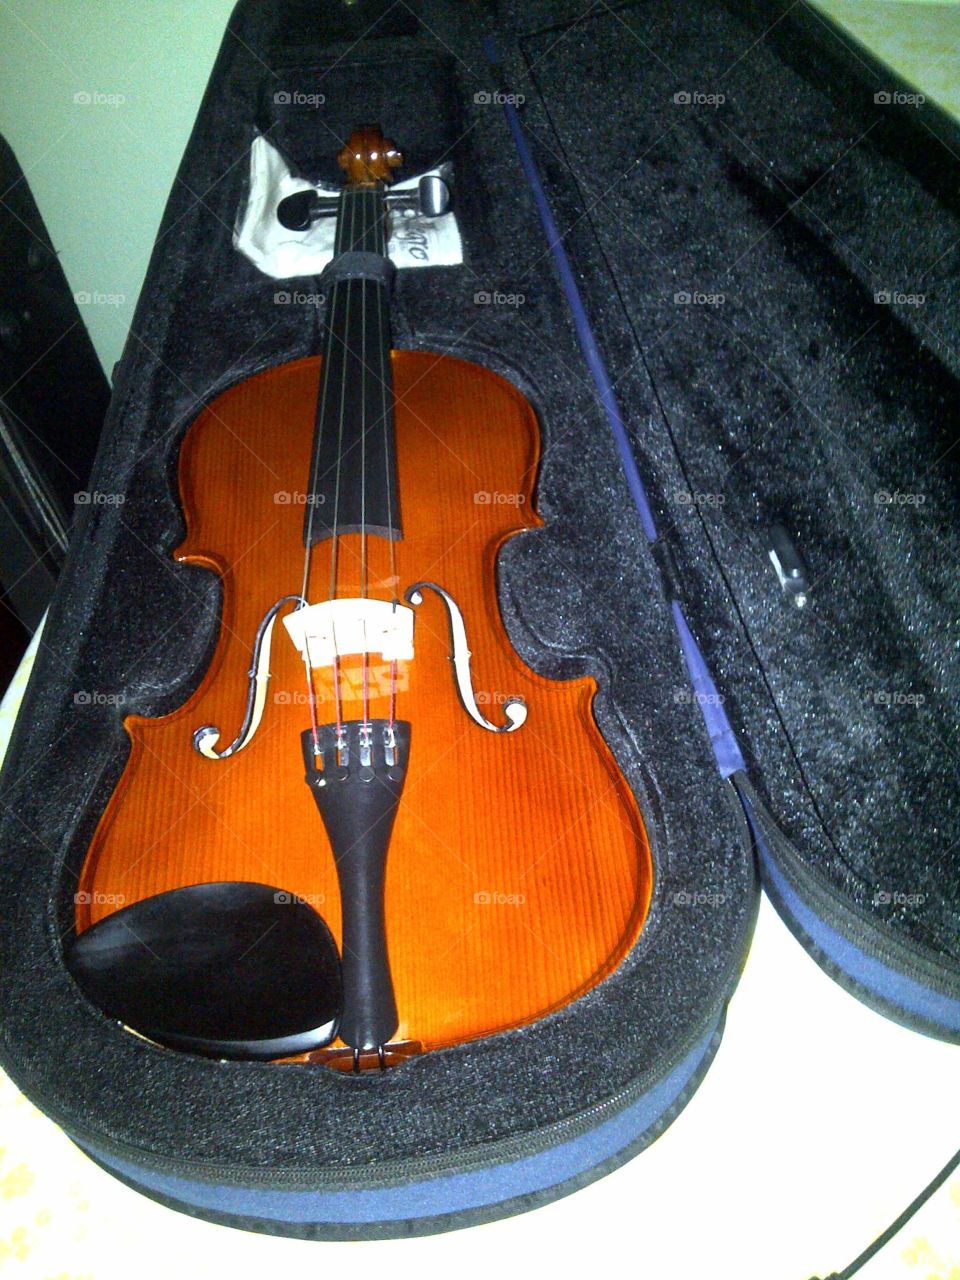 The Viola. It holds the orchestra together. The strength lies within the strings. A beautiful way to touch the soul. 